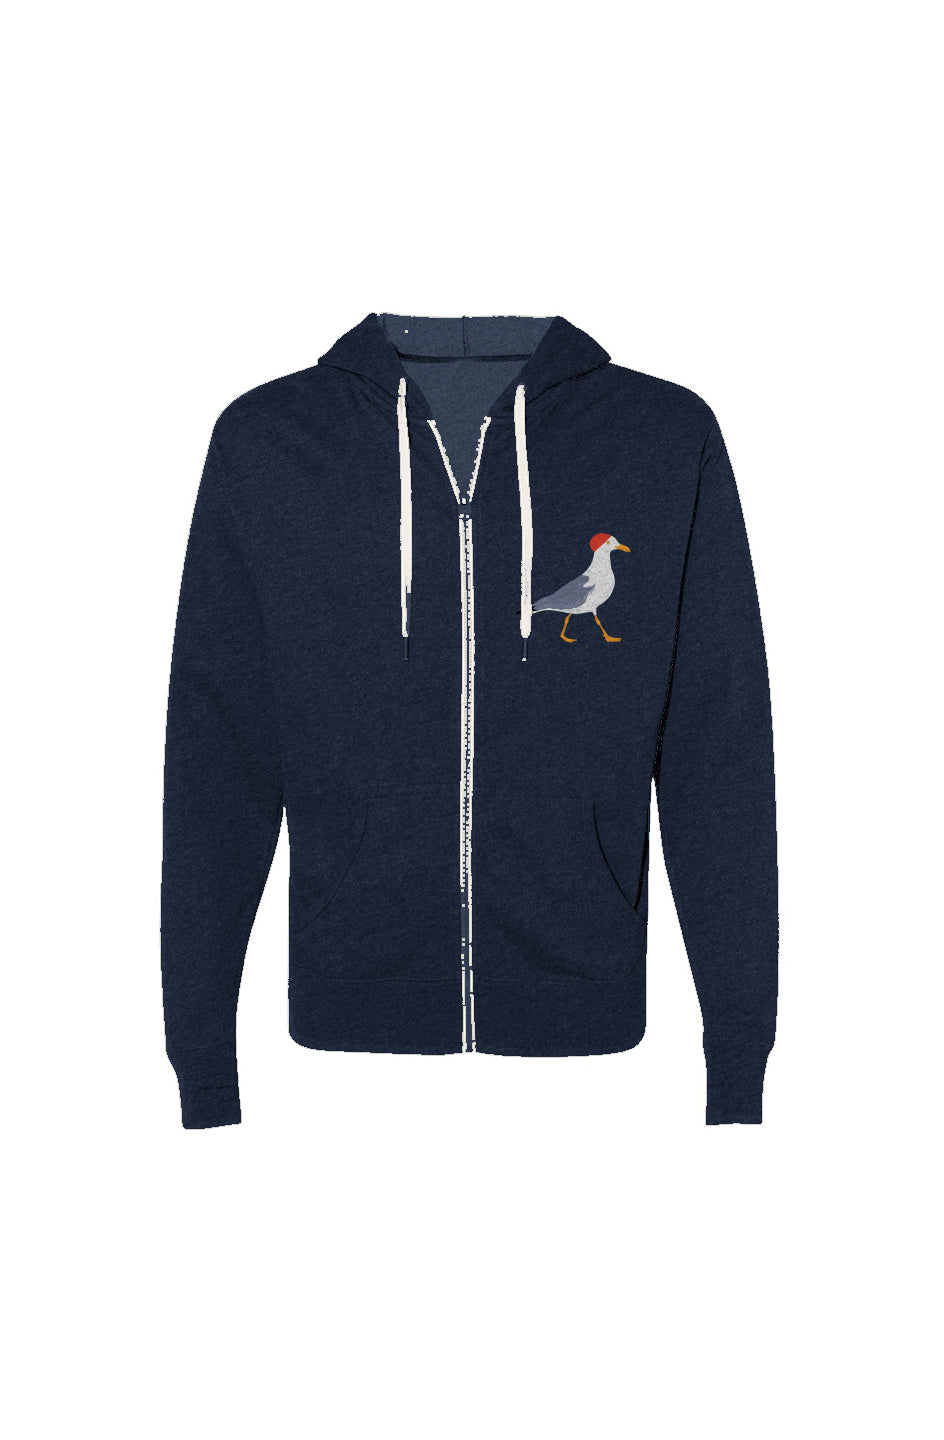 Steven SeaGull French Terry Zip-Up Hoodie